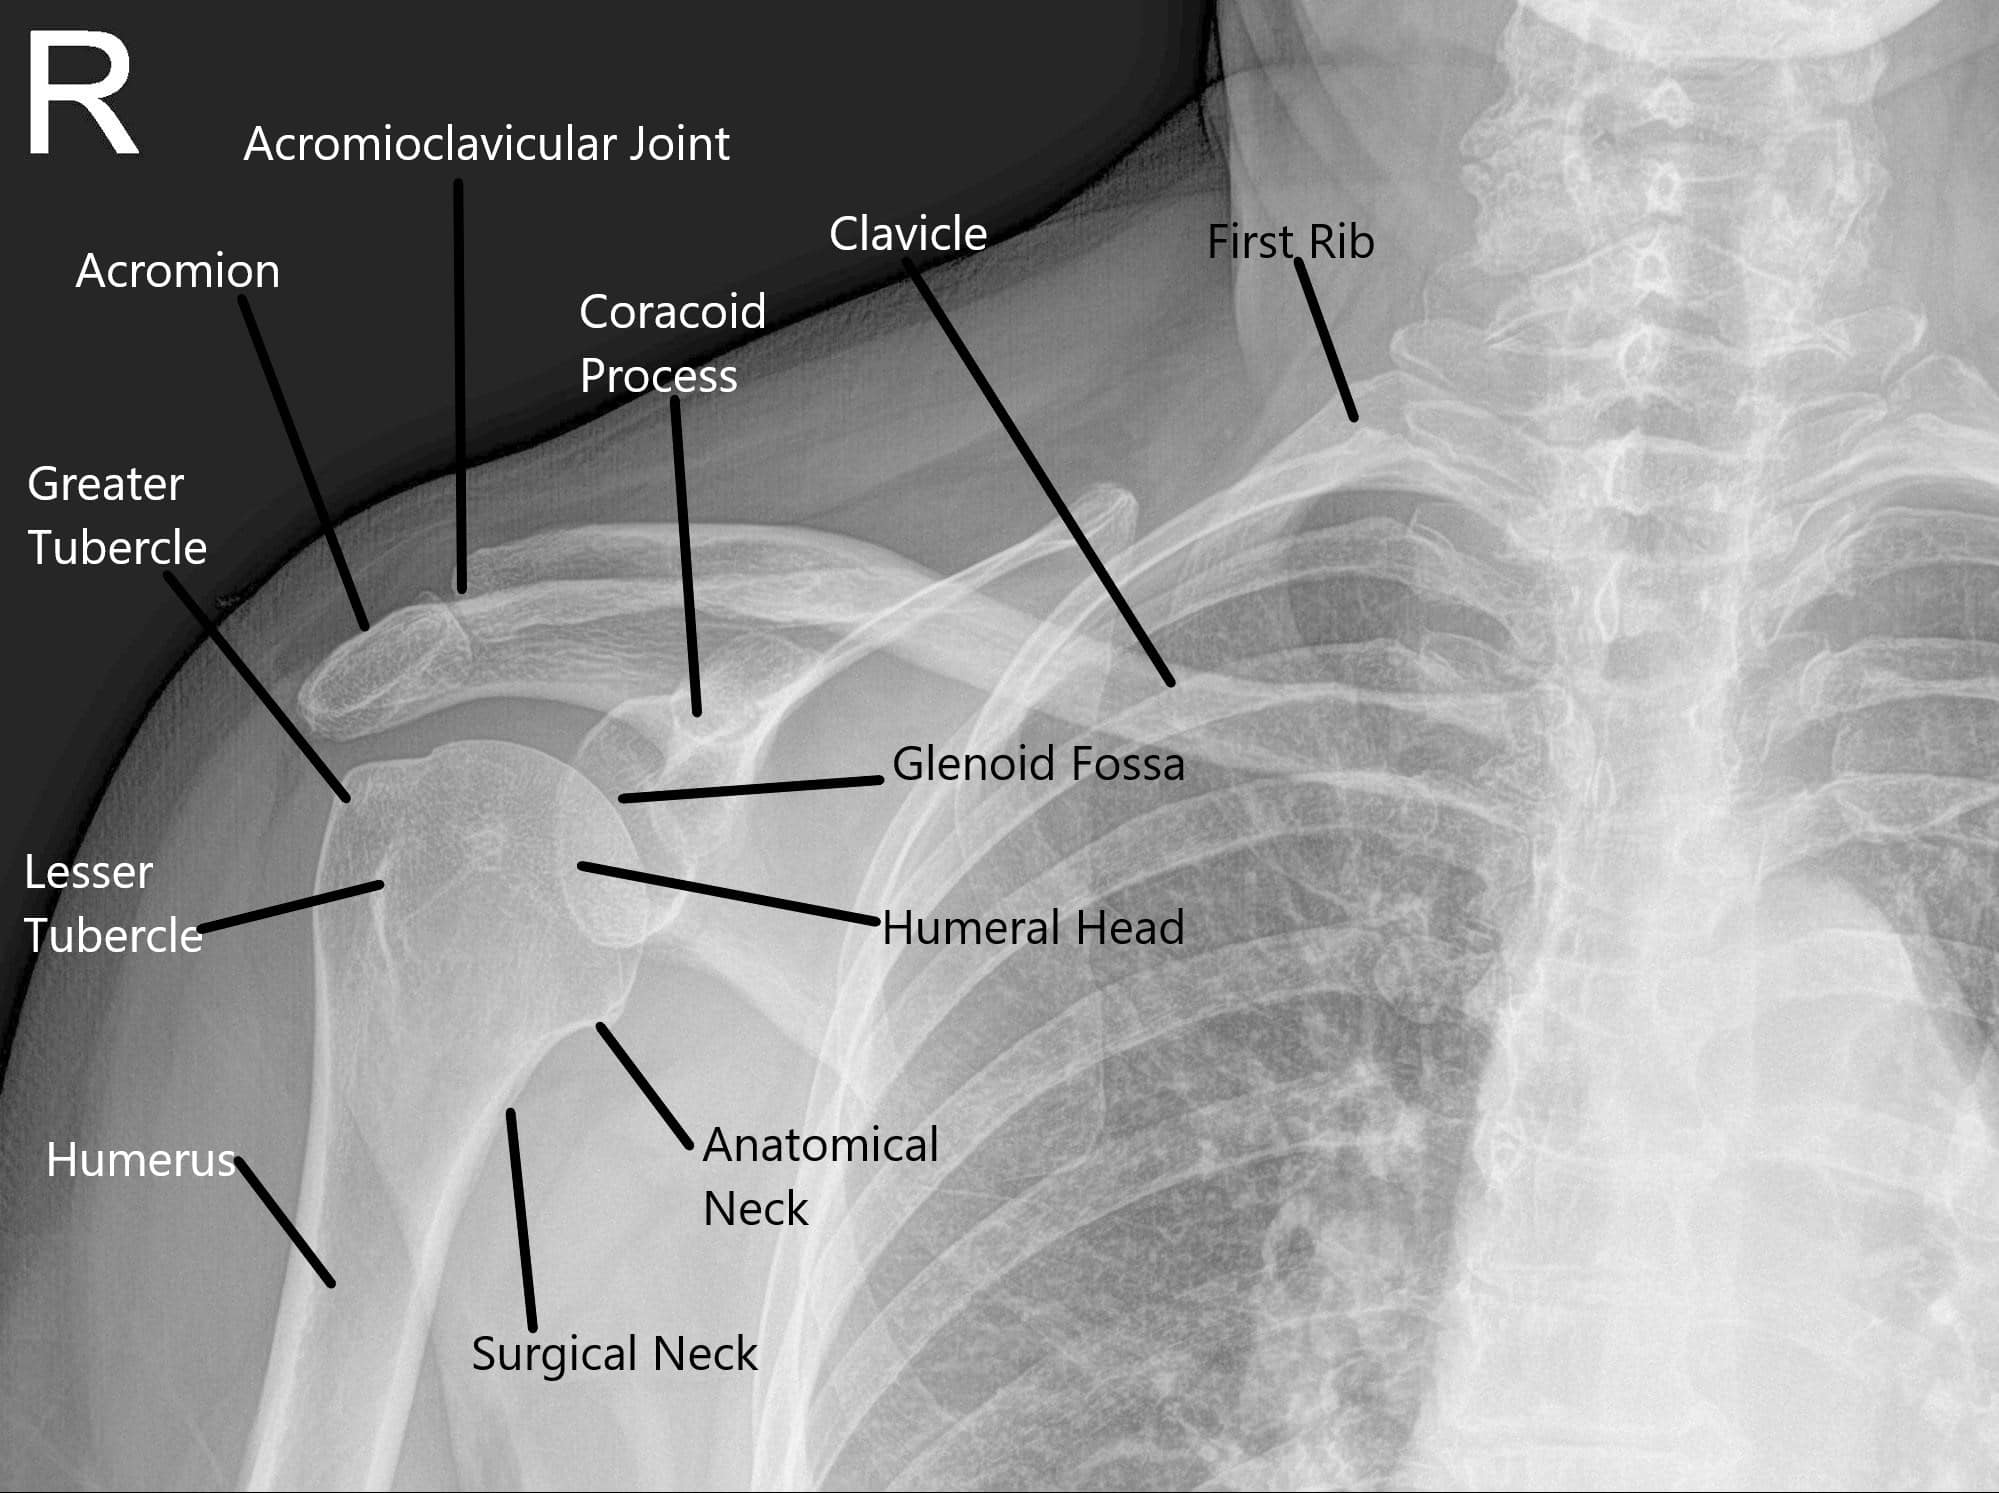 X-ray showing AP view of the right shoulder